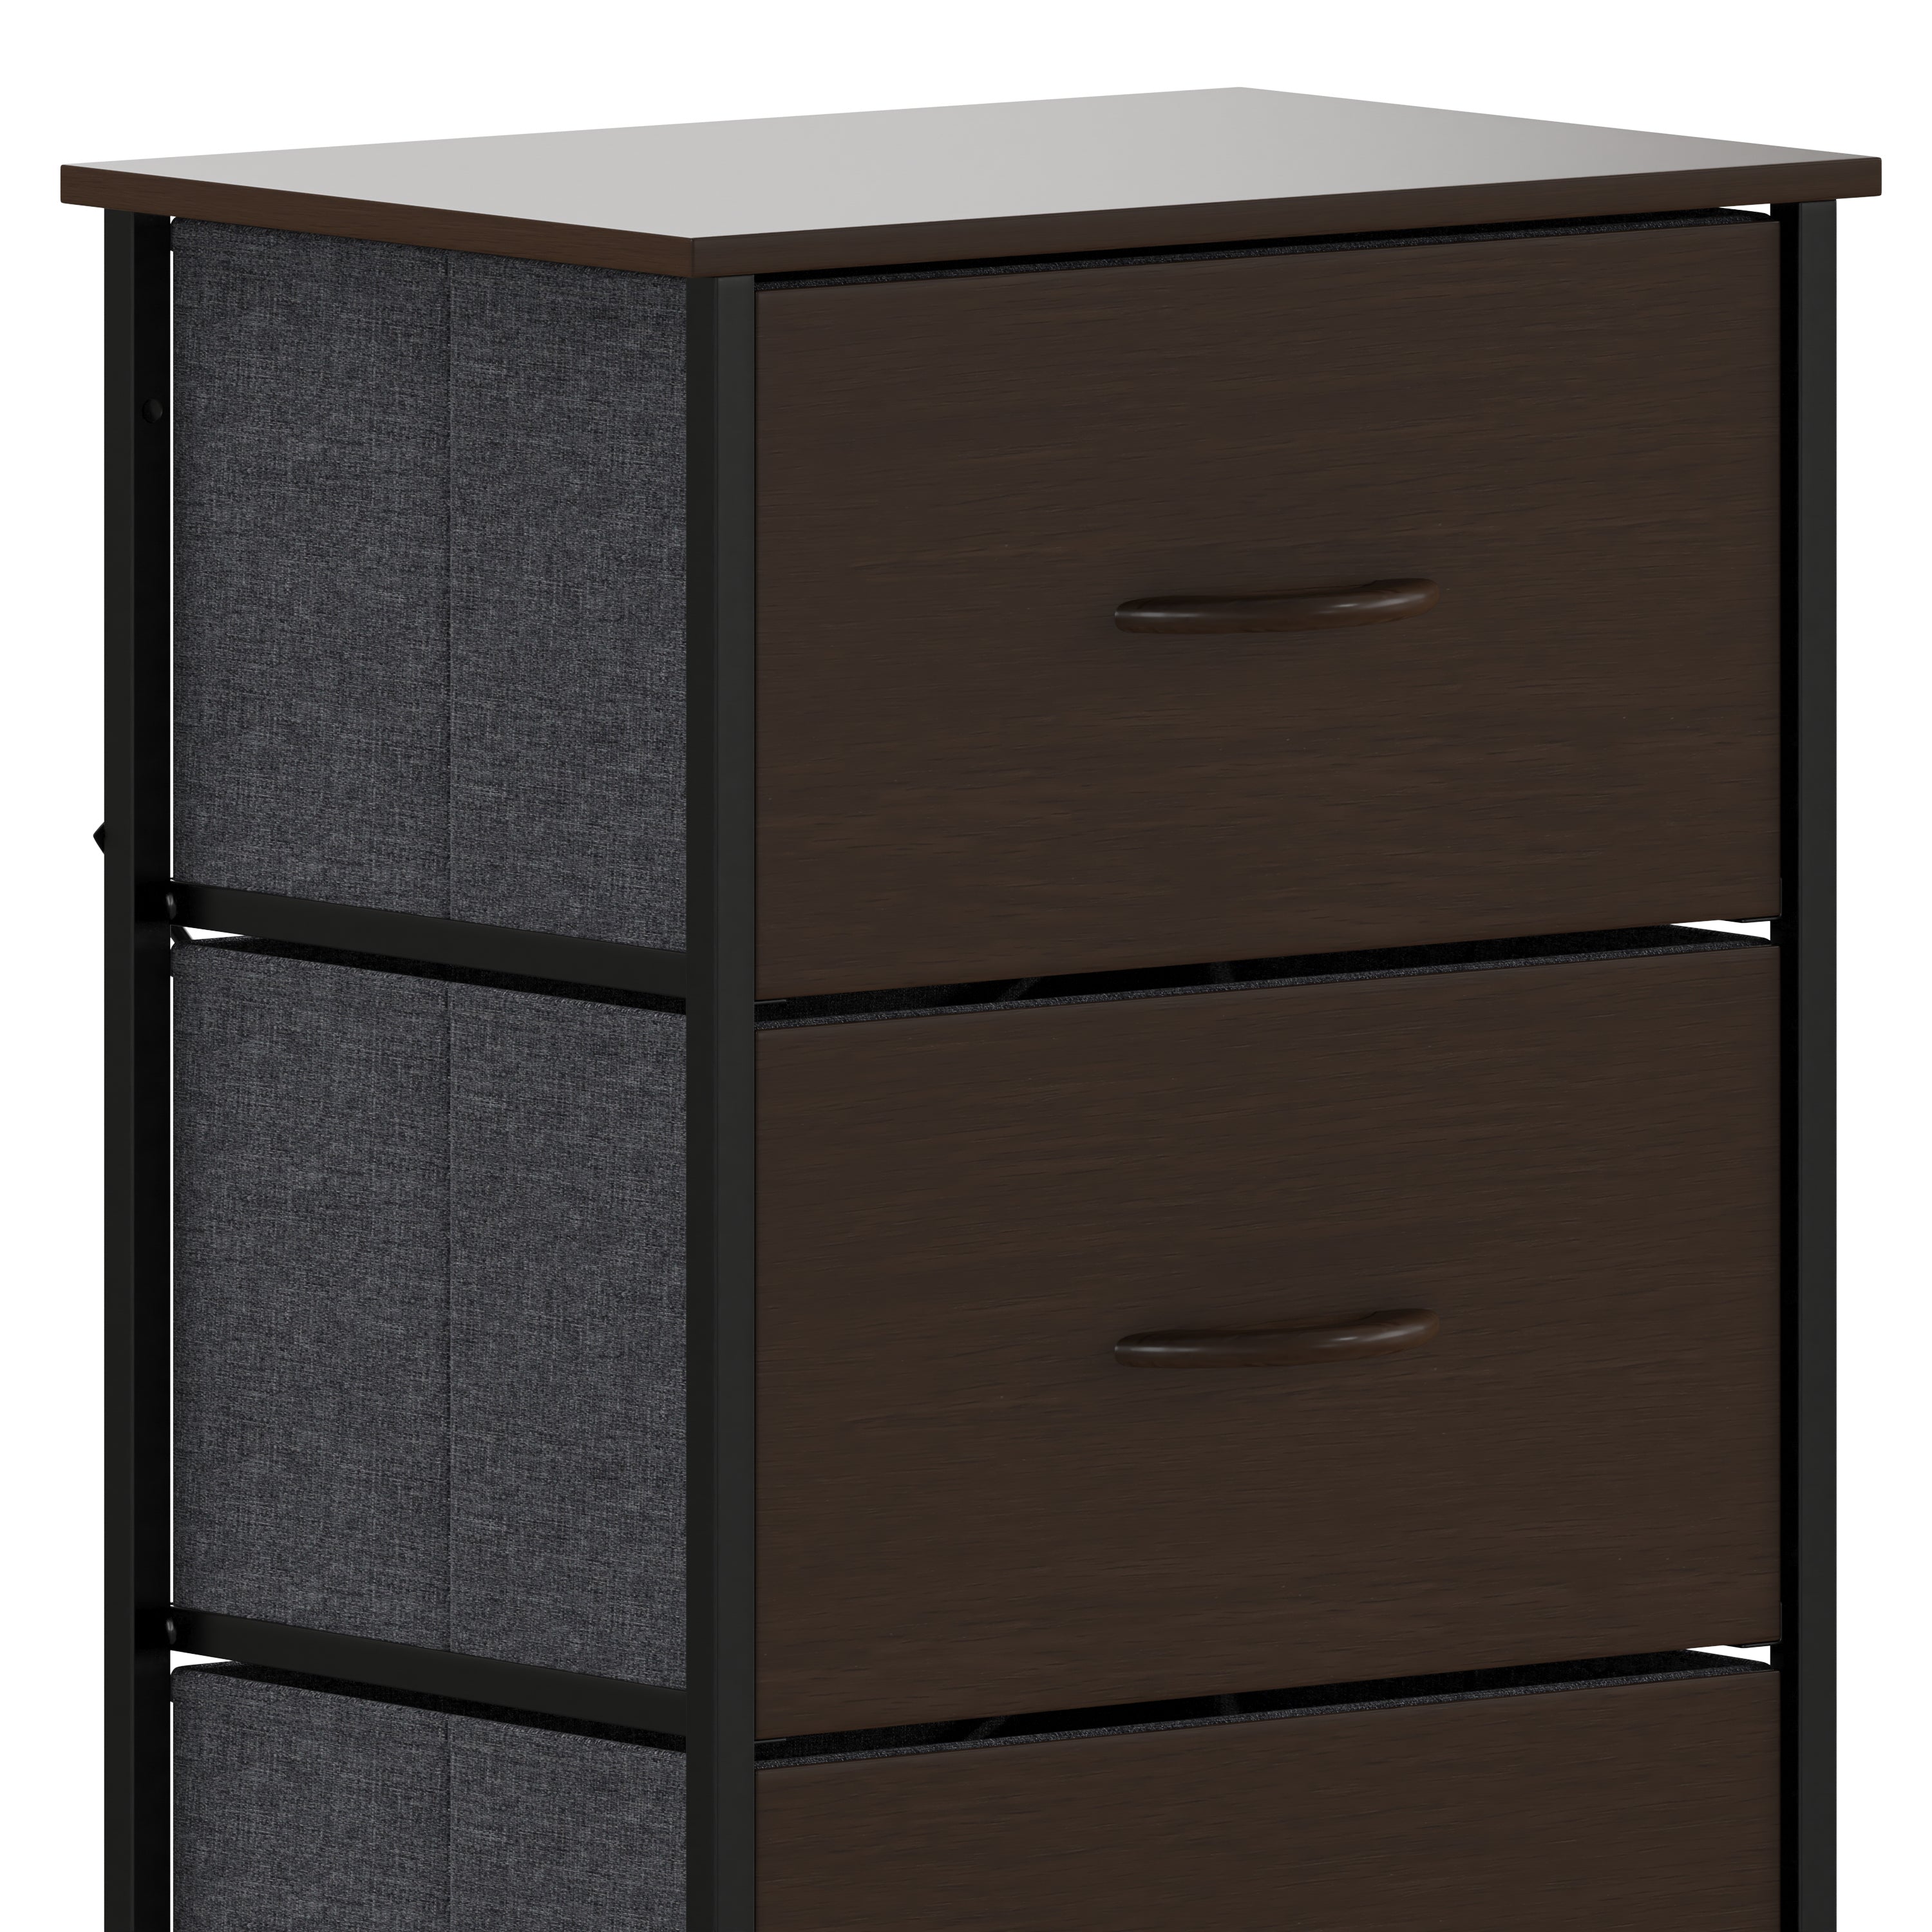 Harris 4 Drawer Vertical Storage Dresser with Cast Iron Frame, Wood Top and Easy Pull Engineered Wood Drawers with Wooden Handles-Dresser-Flash Furniture-Wall2Wall Furnishings